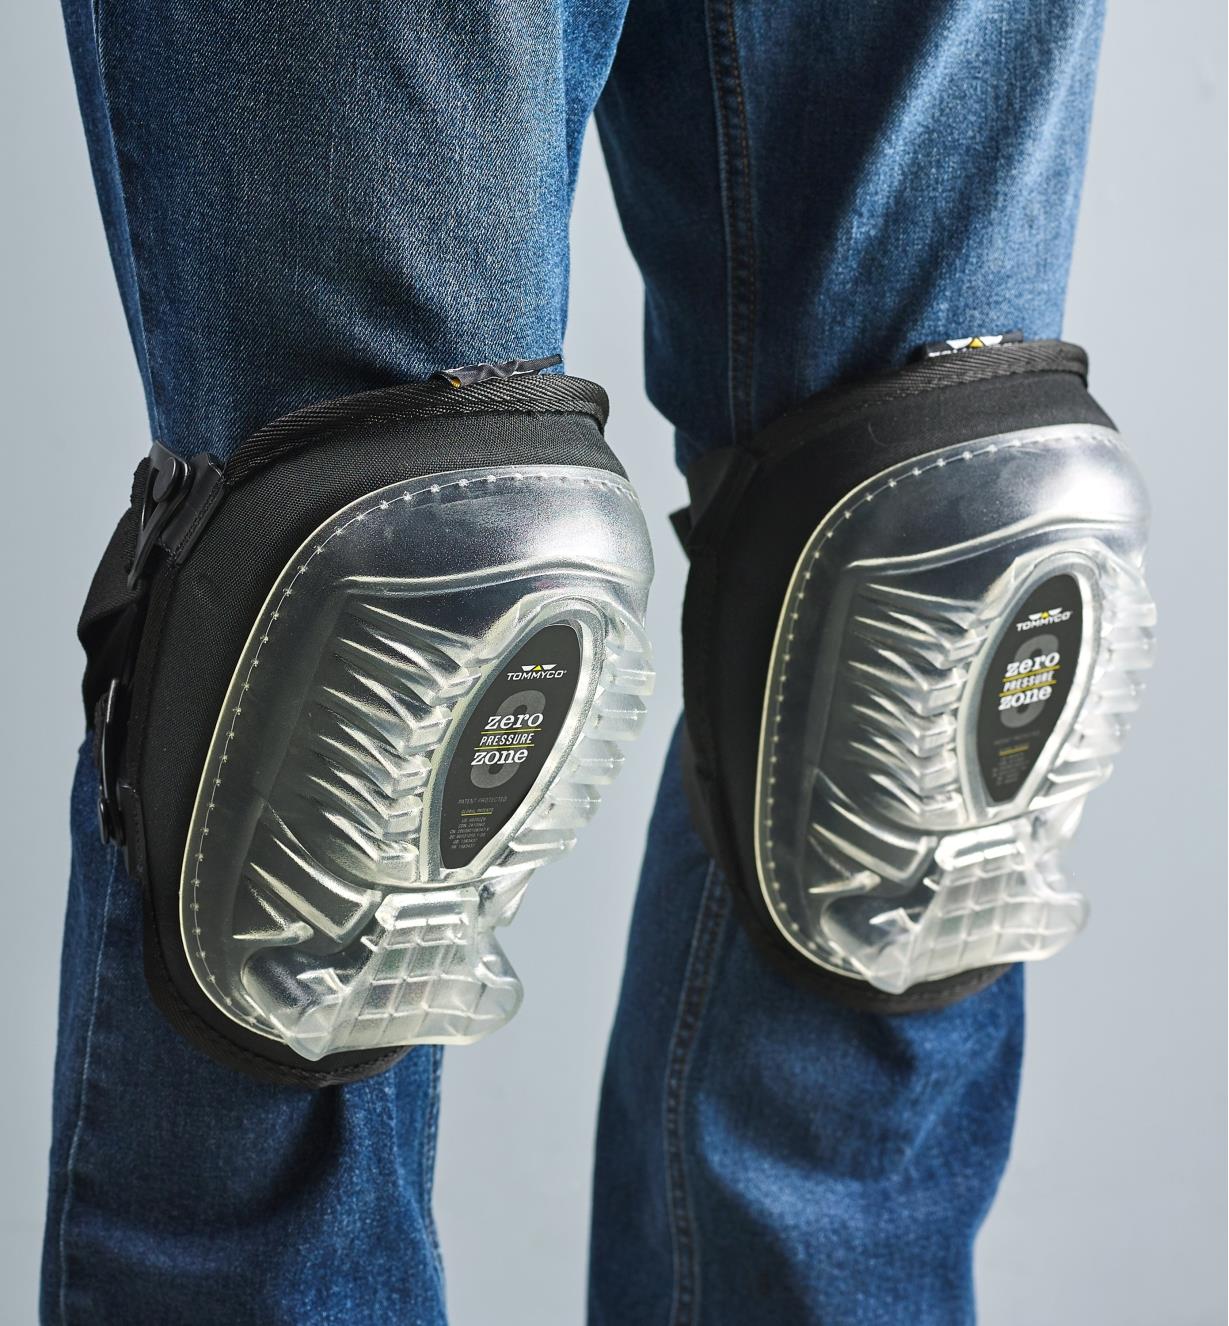 Front view of the small premium knee pads